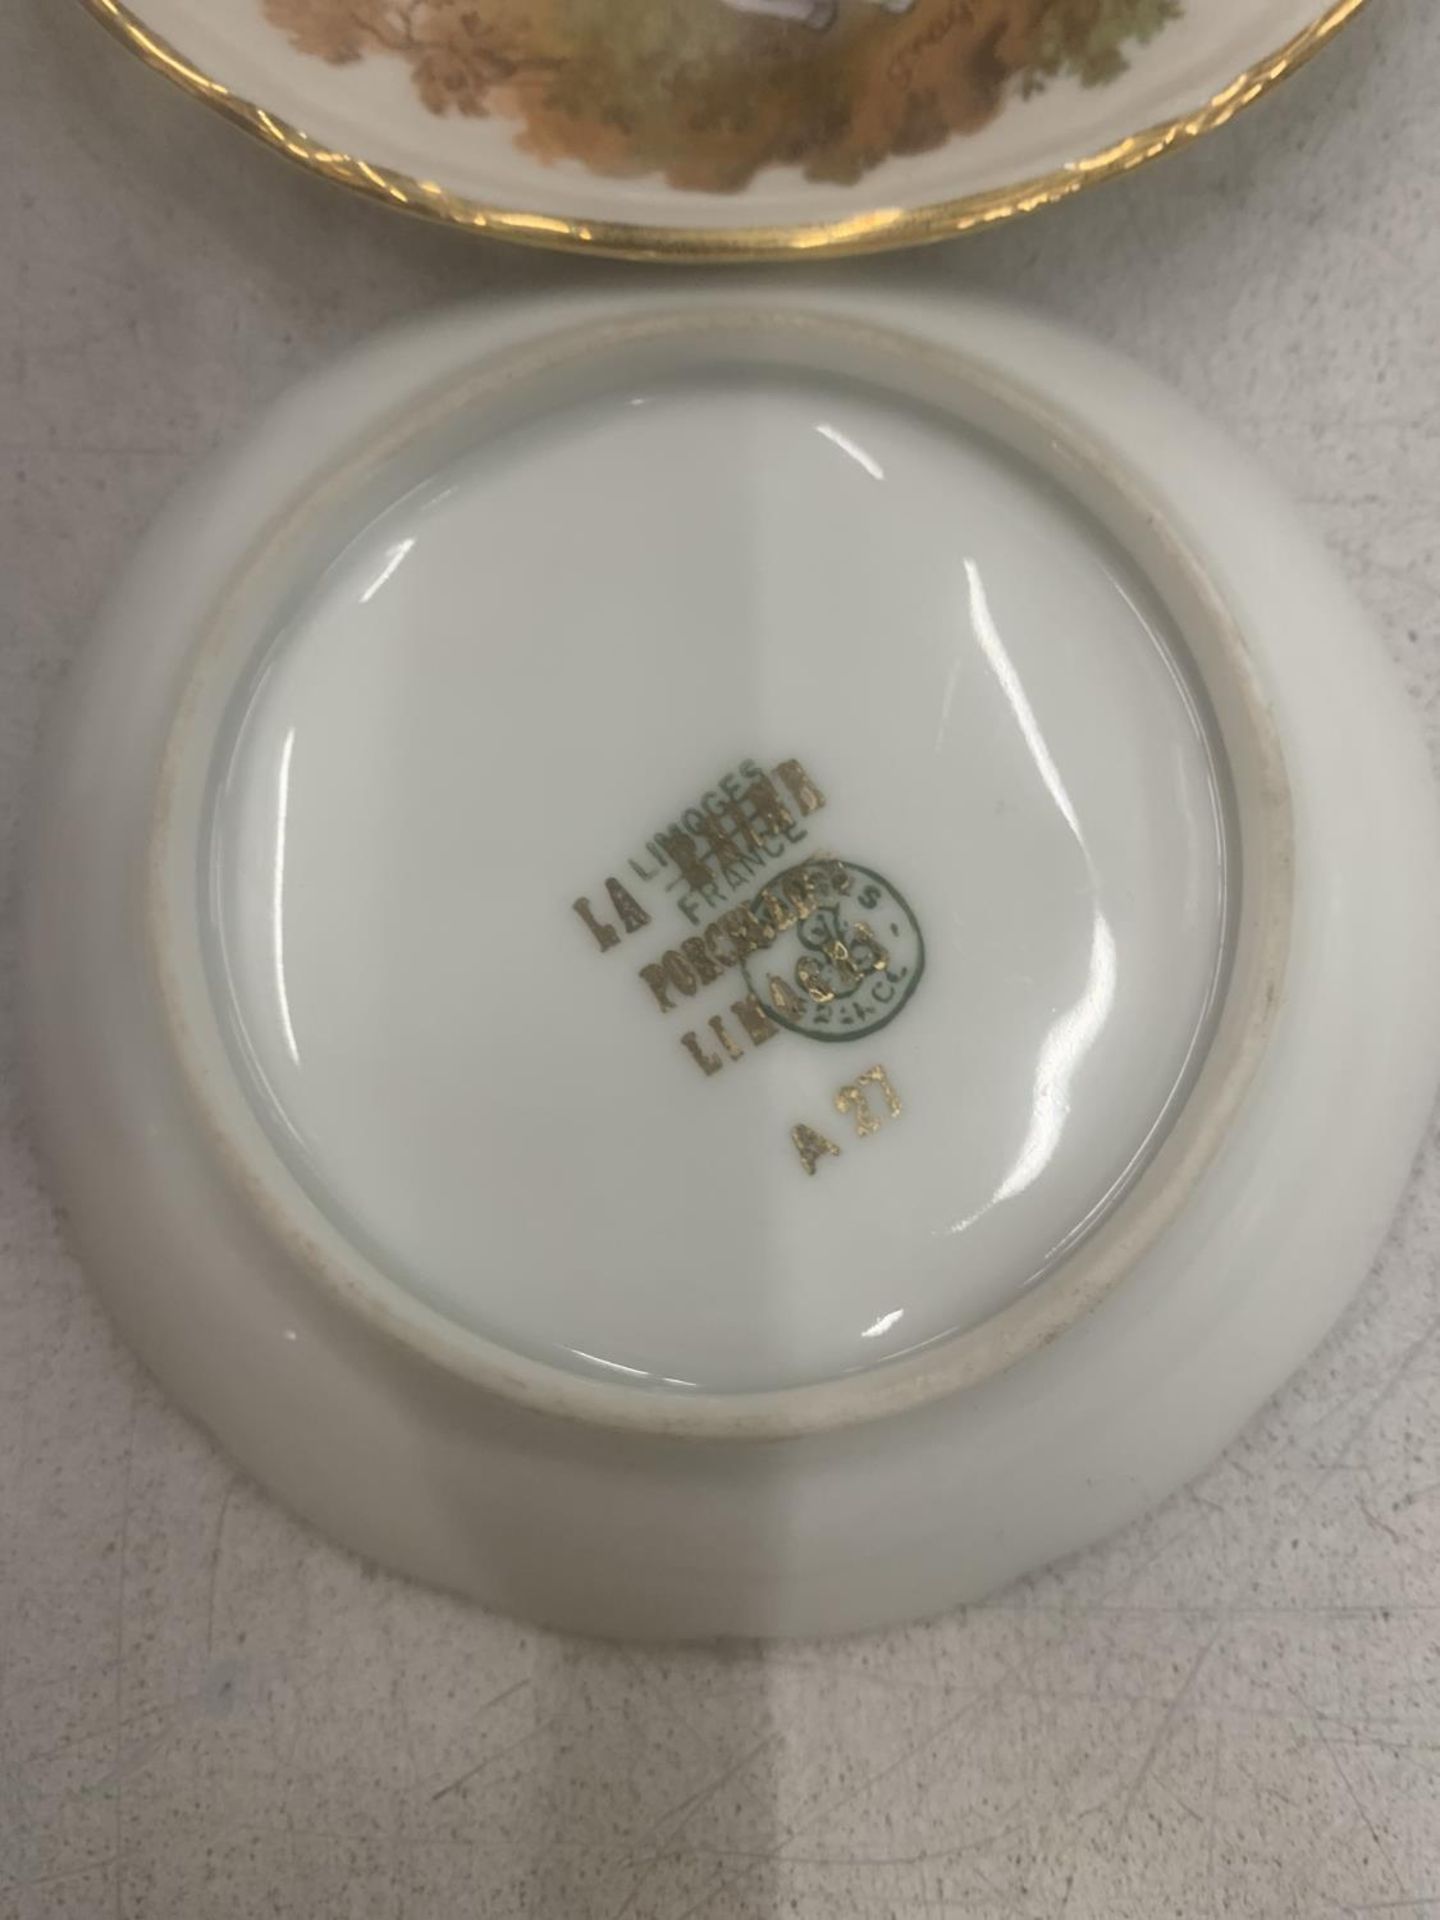 A LARGE QUANTITY OF LIMOGES TO INCLUDE A FOOTED CAKE PLATE, TRINKET BOXES, MINIATURE PLATES, SMALL - Image 6 of 6